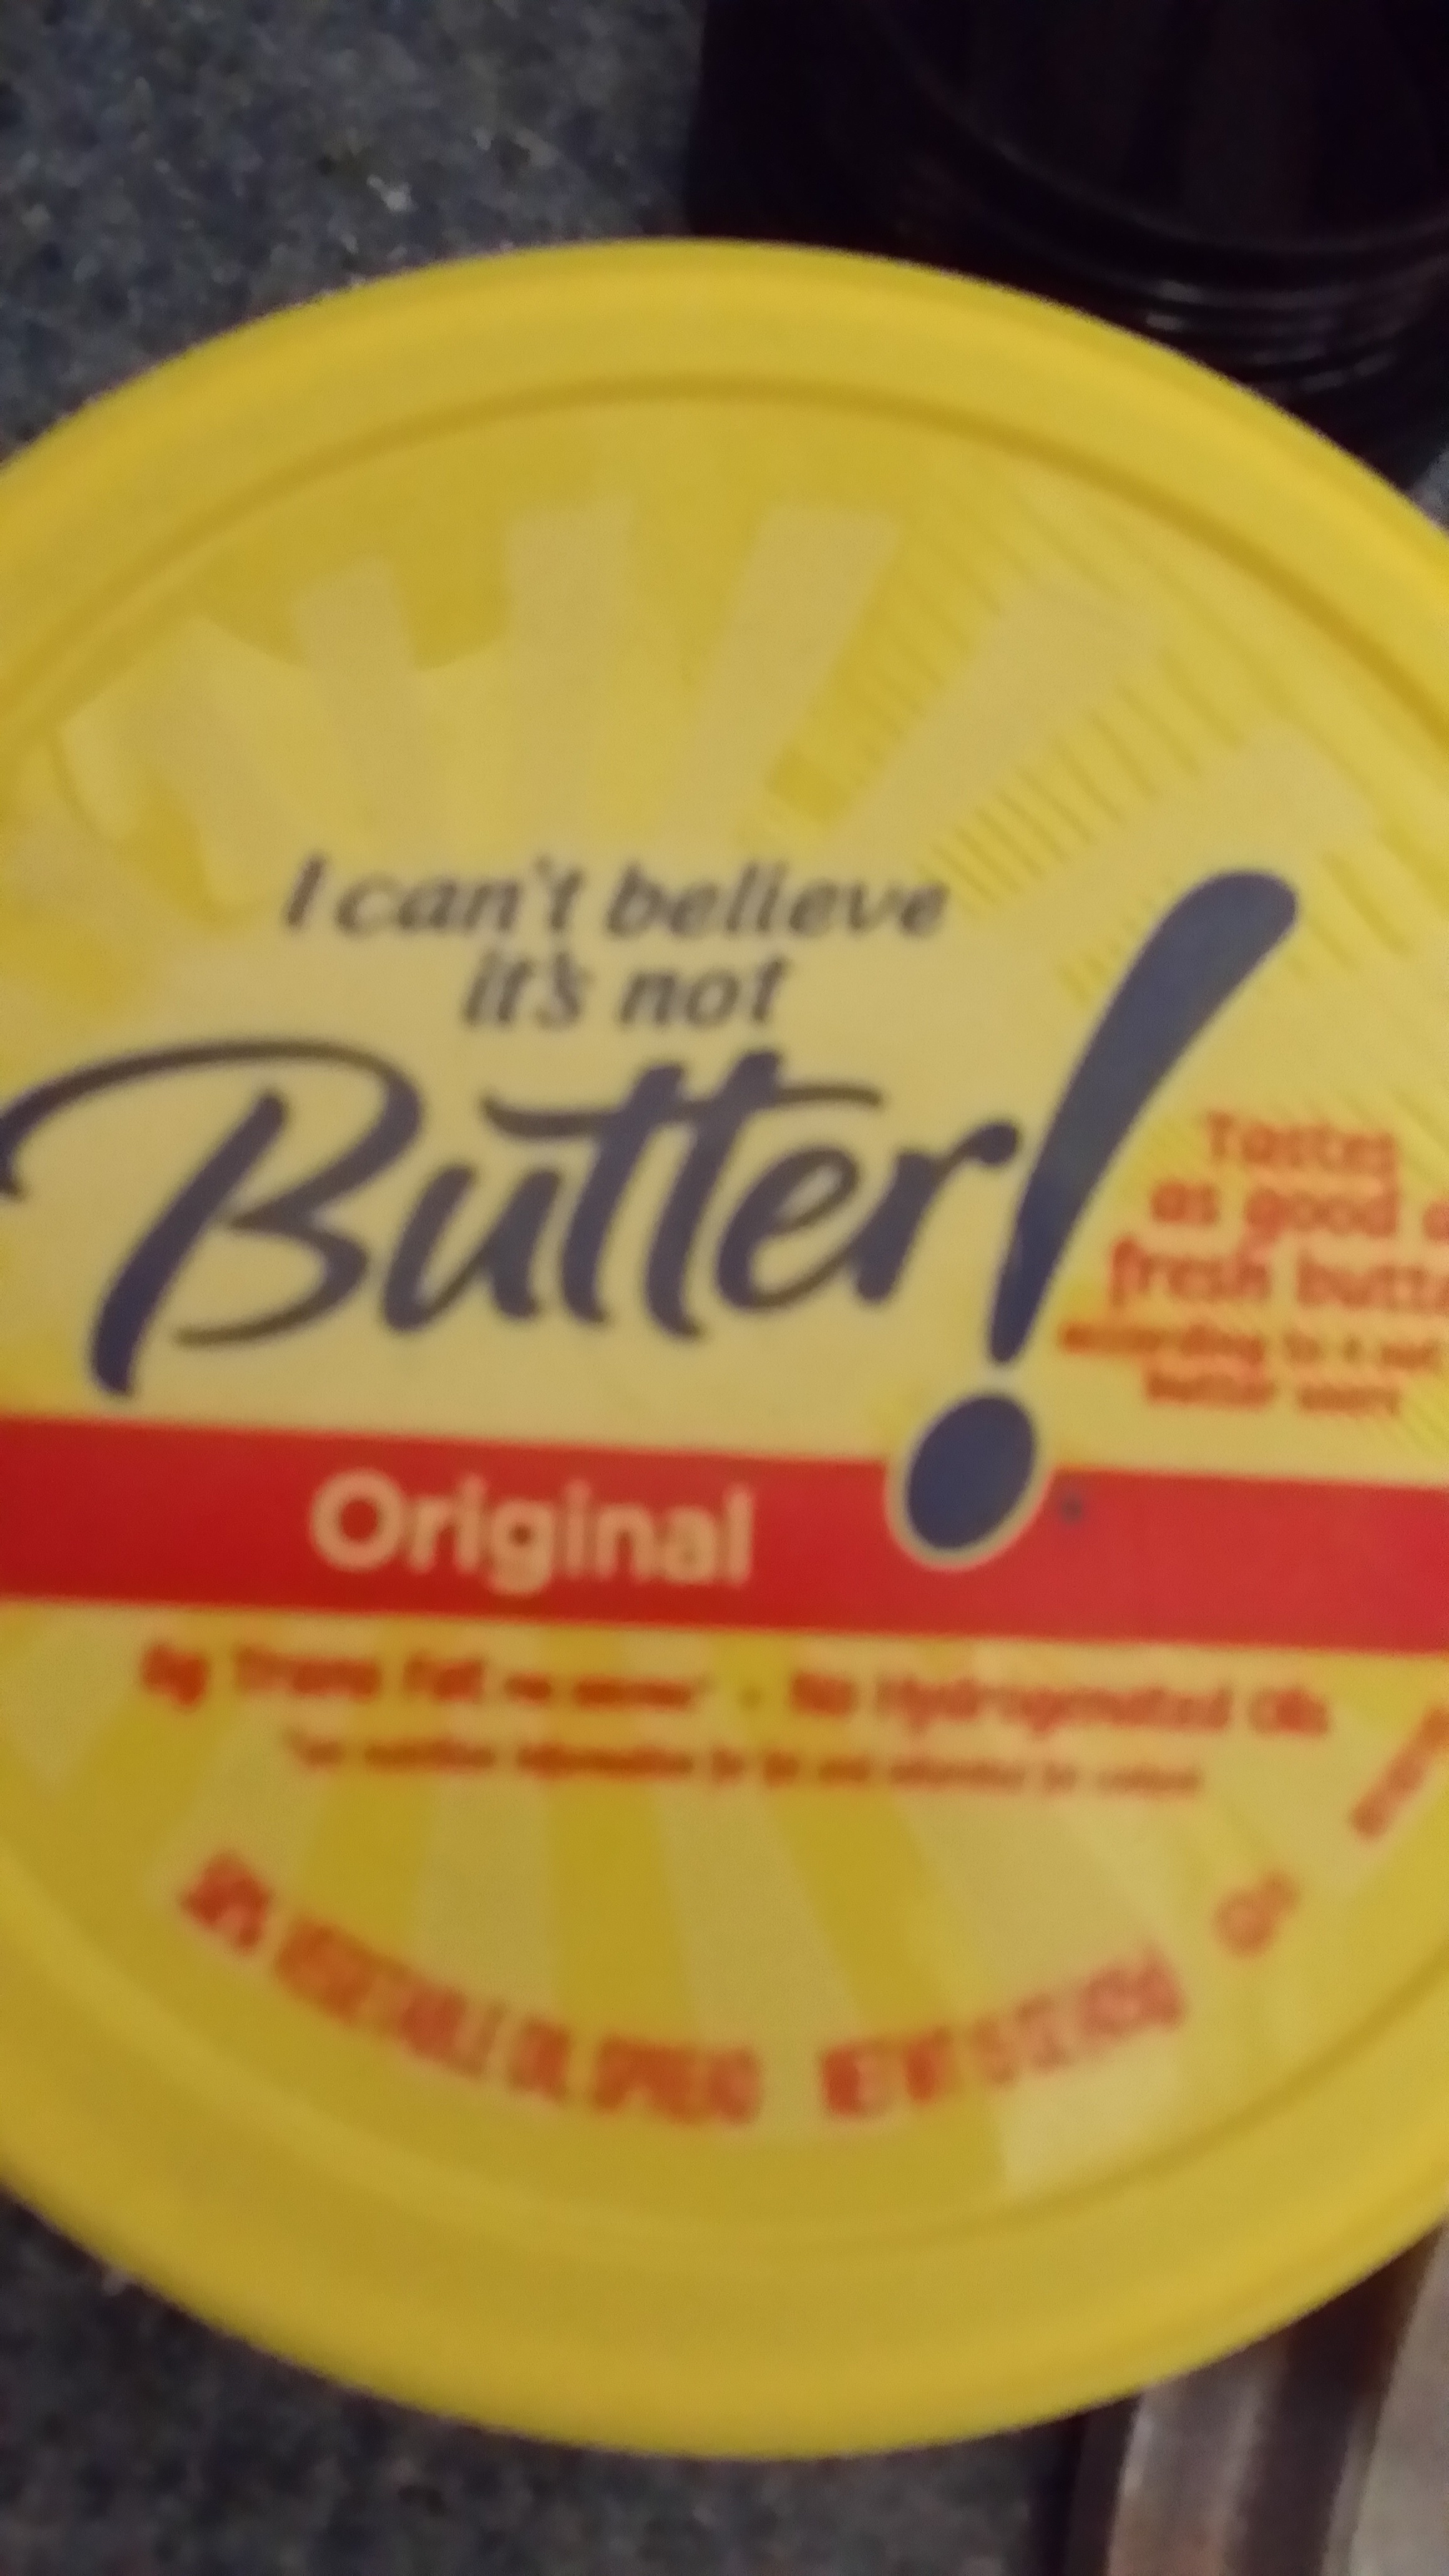 I can't believe it's not butter!, 45% vegetable oil spread, original - Product